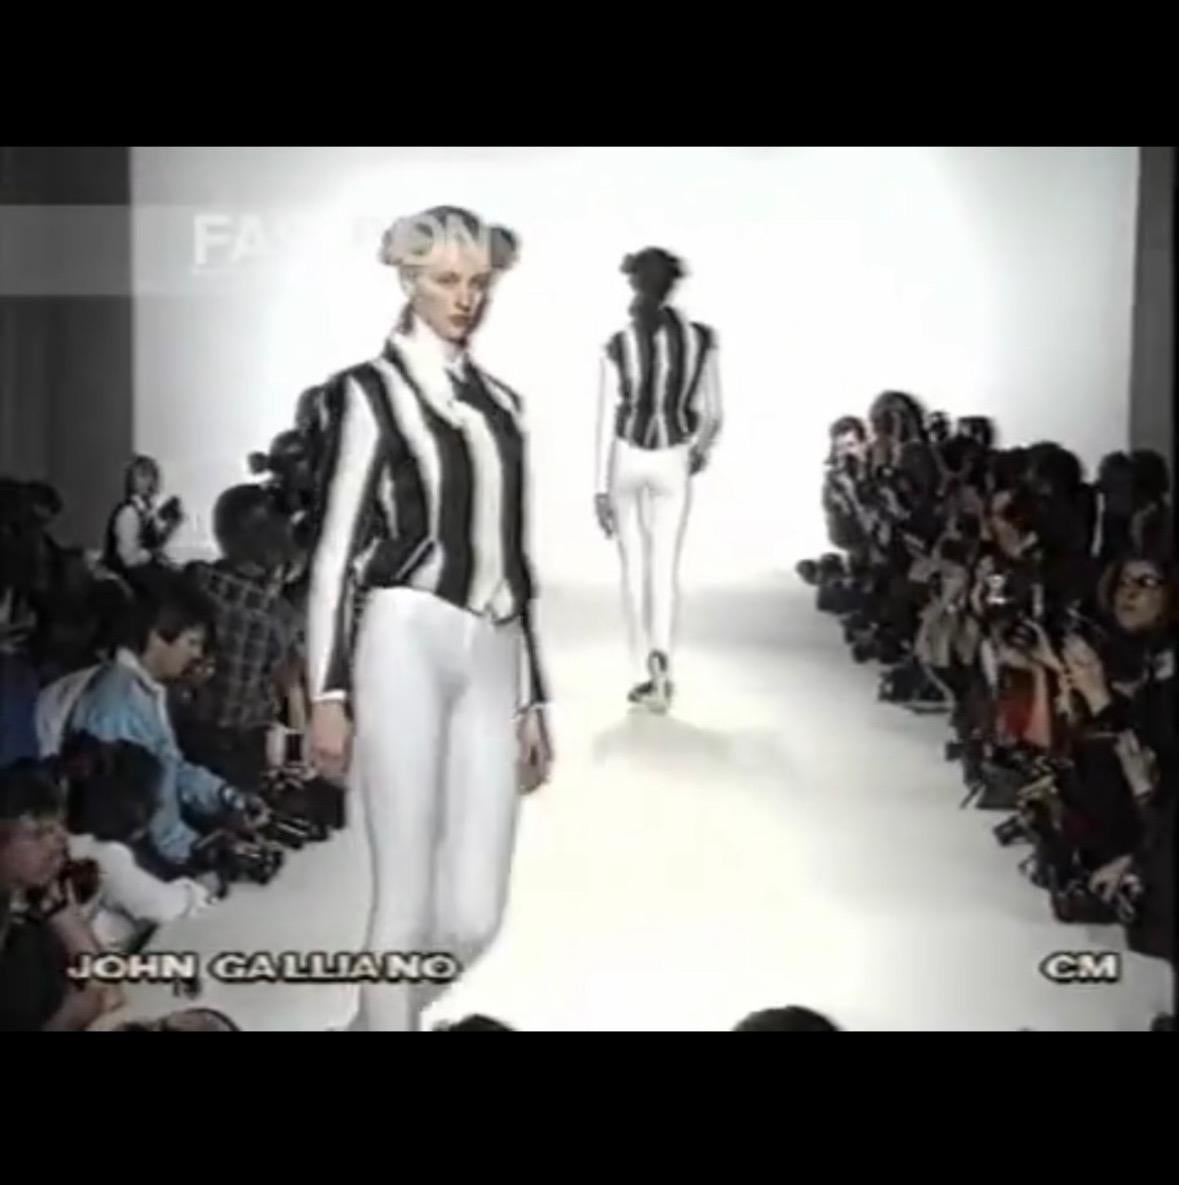 Presenting a fabulous black and white striped John Galliano London jacket. From the Fall/Winter 1990 'Fencing' collection, this beautiful jacket debuted on the season's runway. A fabulous example of Galliano's masterful tailoring and design, this